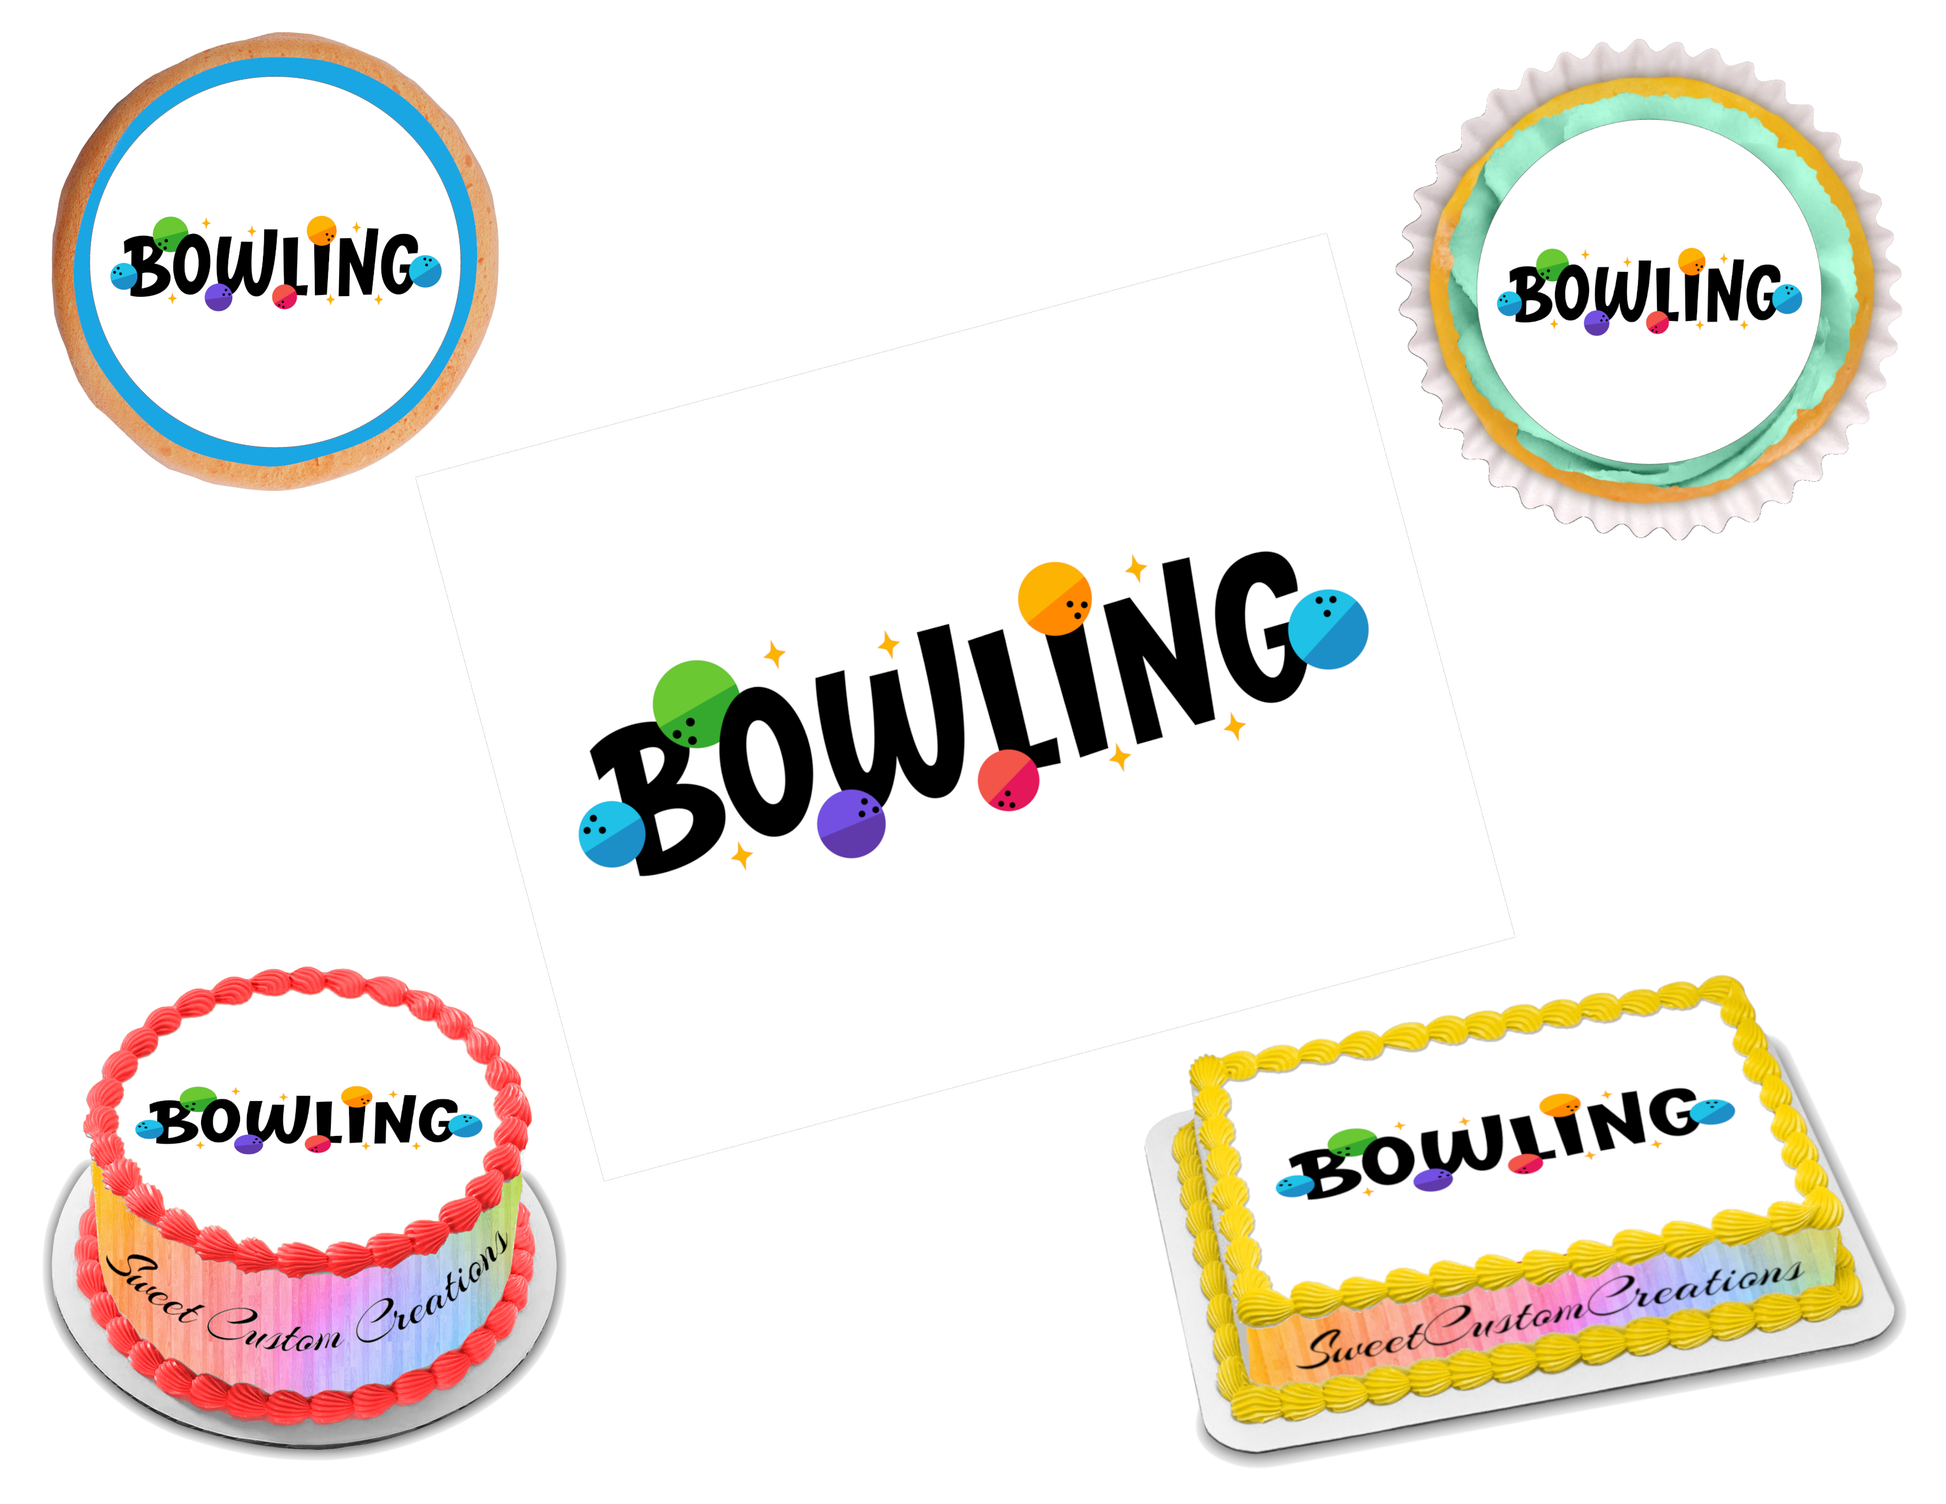 Bowling Edible Image Frosting Sheet #8 Topper (70+ sizes)